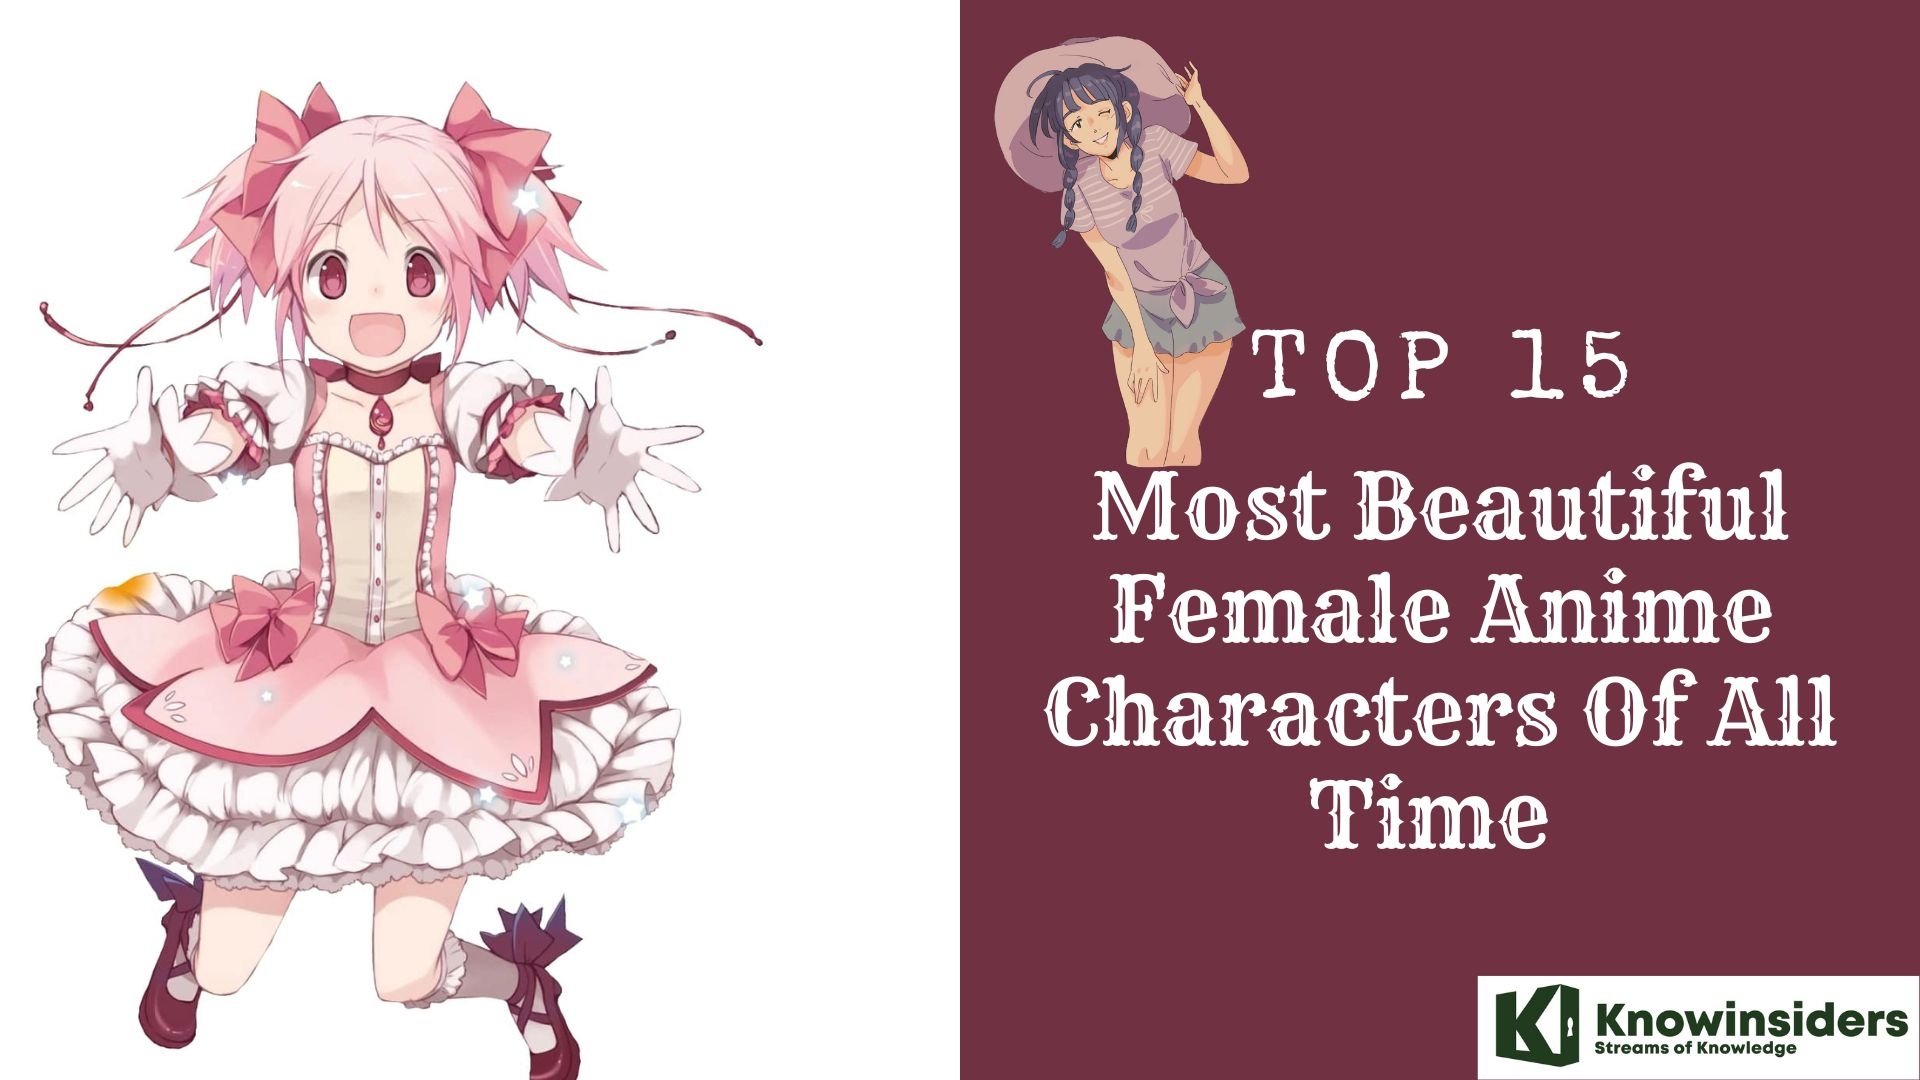 Top 15 Most Beautiful Female Anime Characters Of All Time